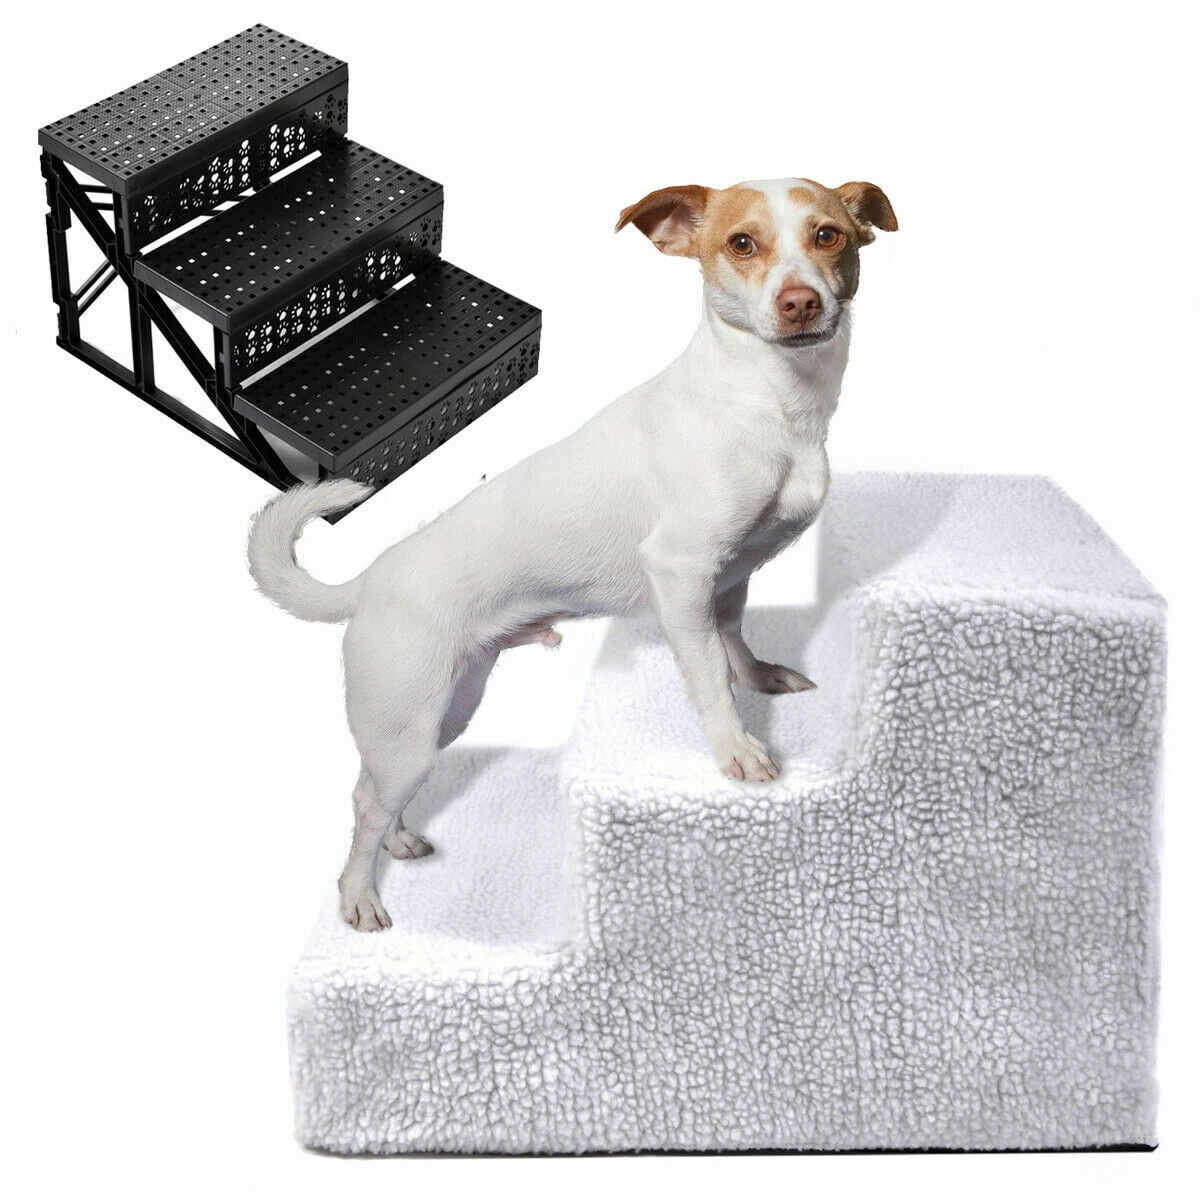 Boutiquespace Soft Cat Dog Steps Ramp Paw design Small Climb Pet Step Stairs Black White